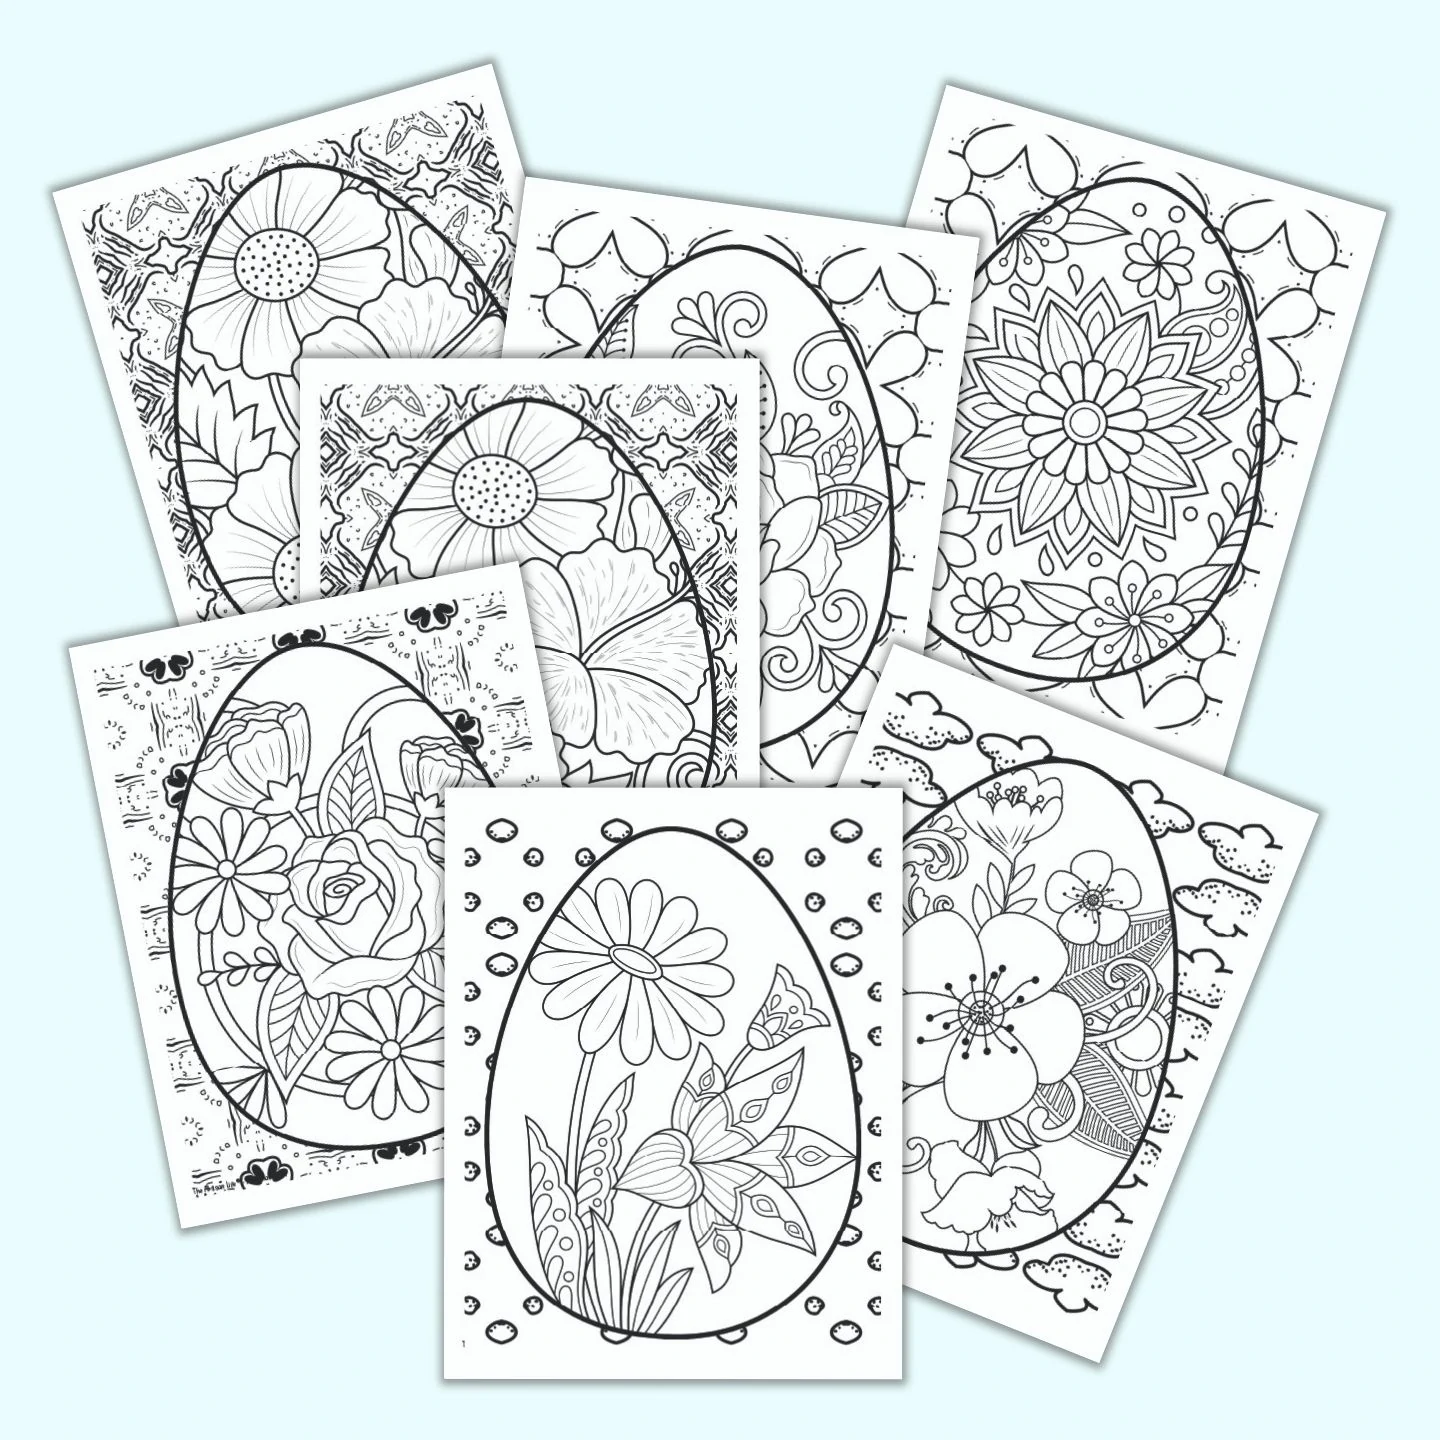 Super Cute Cat Coloring Pages easy no prep kids' activity   The ...